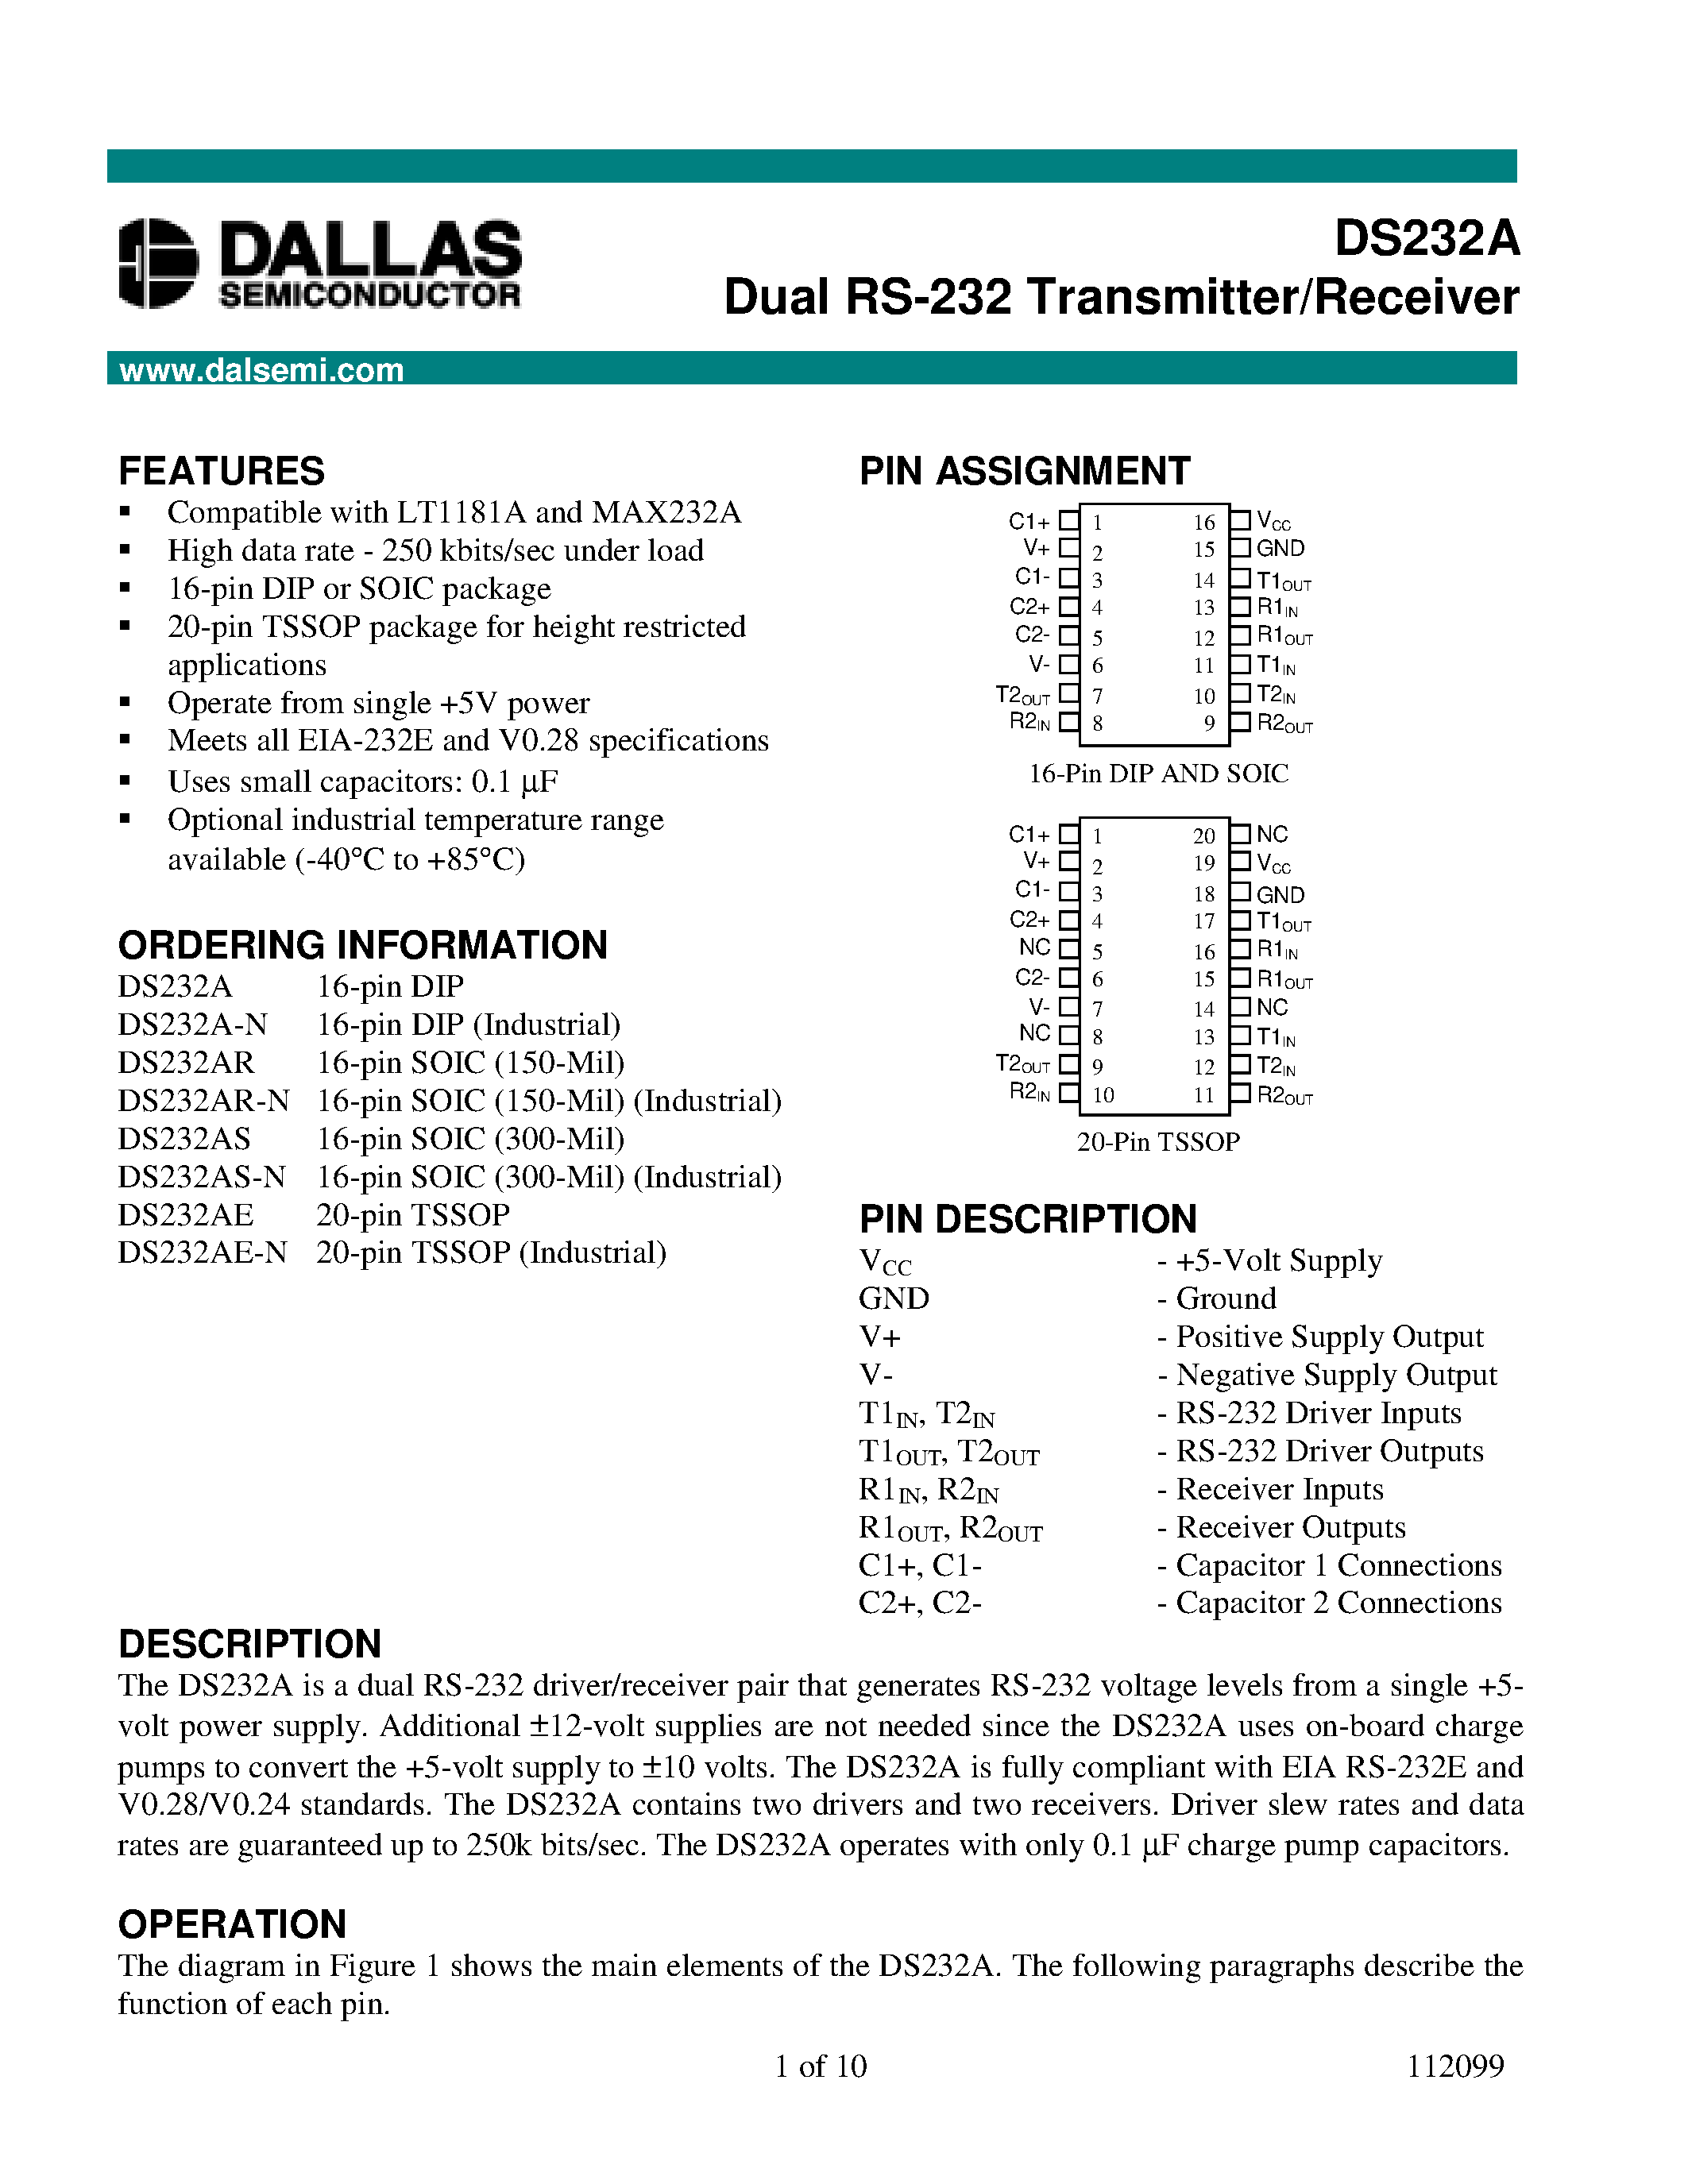 Даташит DS232A-N - Dual RS-232 Transmitter/Receiver страница 1